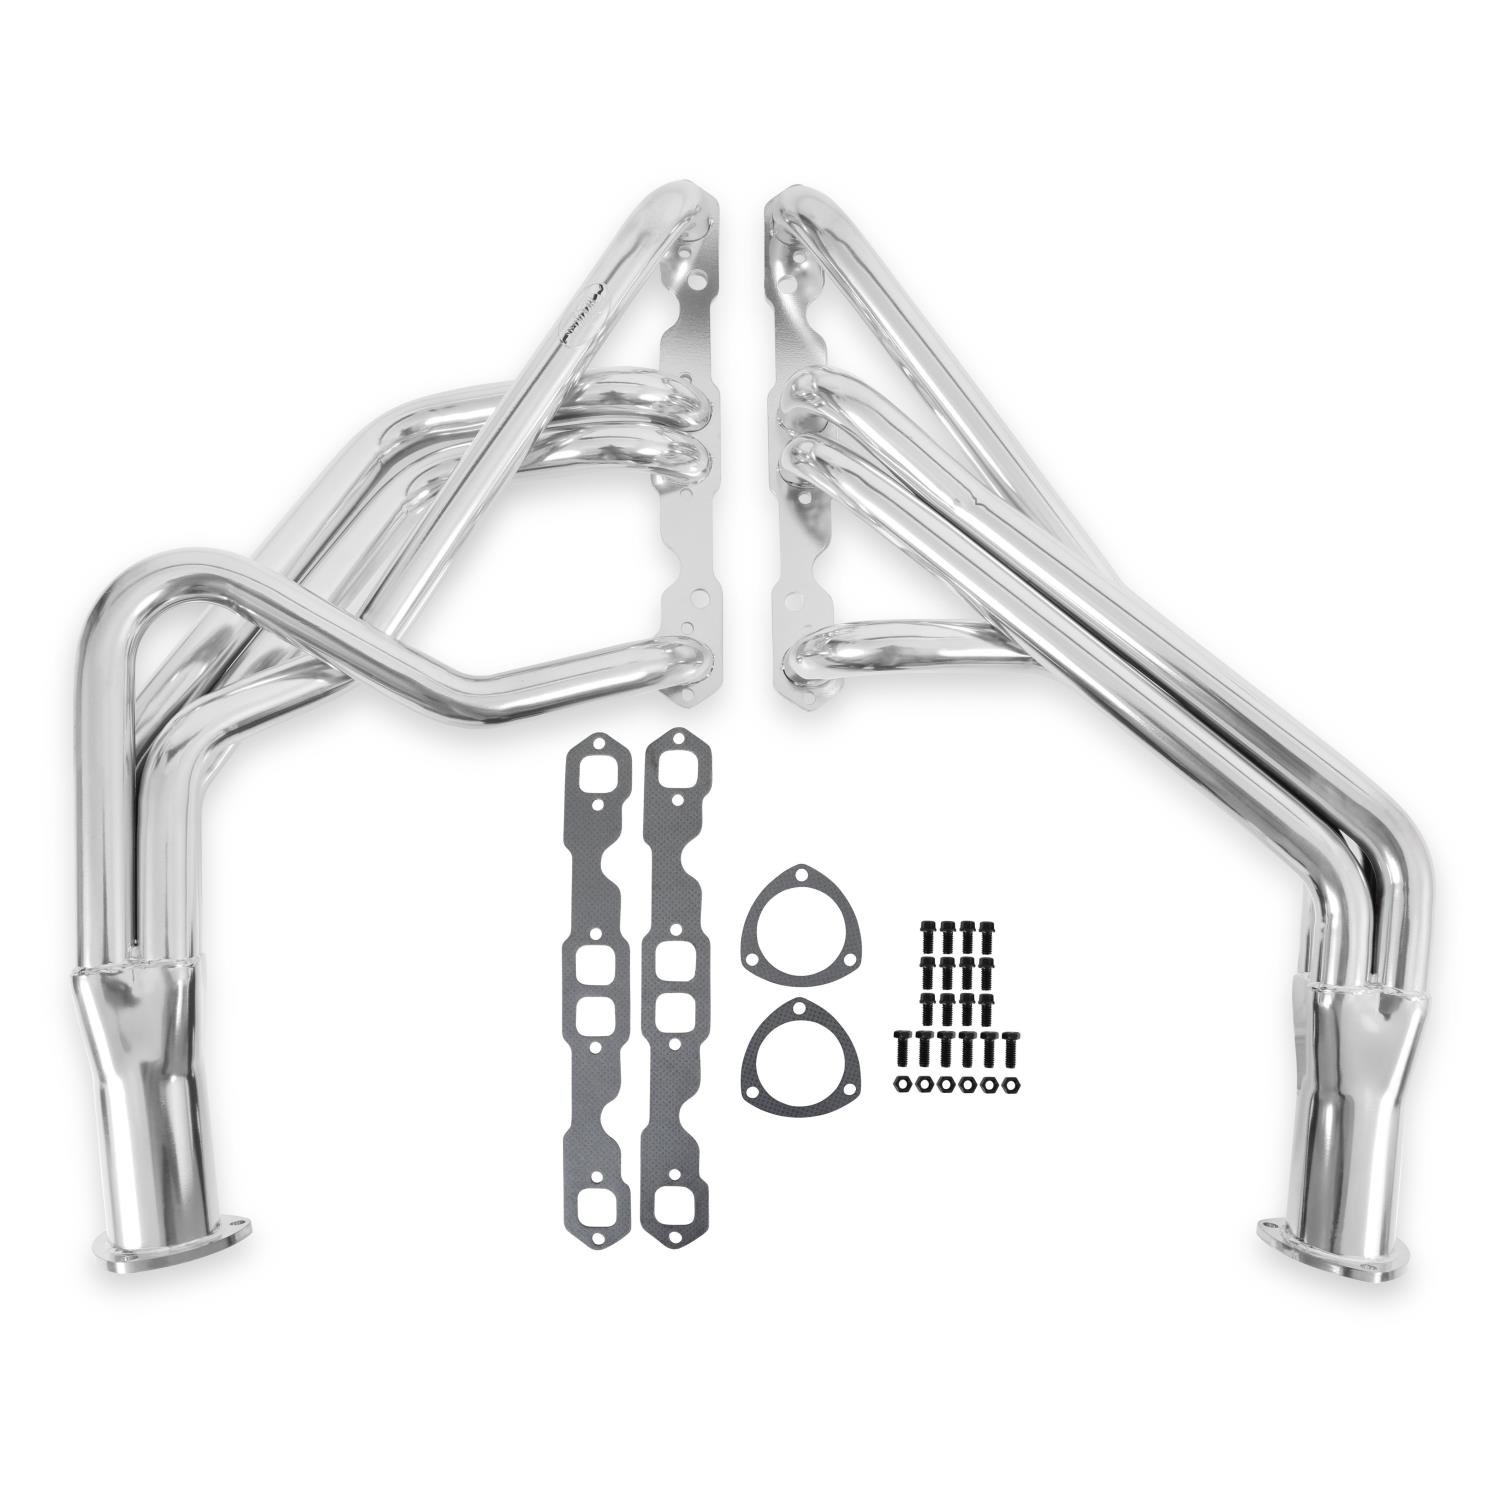 2458-1 Competition Long Tube Headers 265-400 Chevy Small Block V8